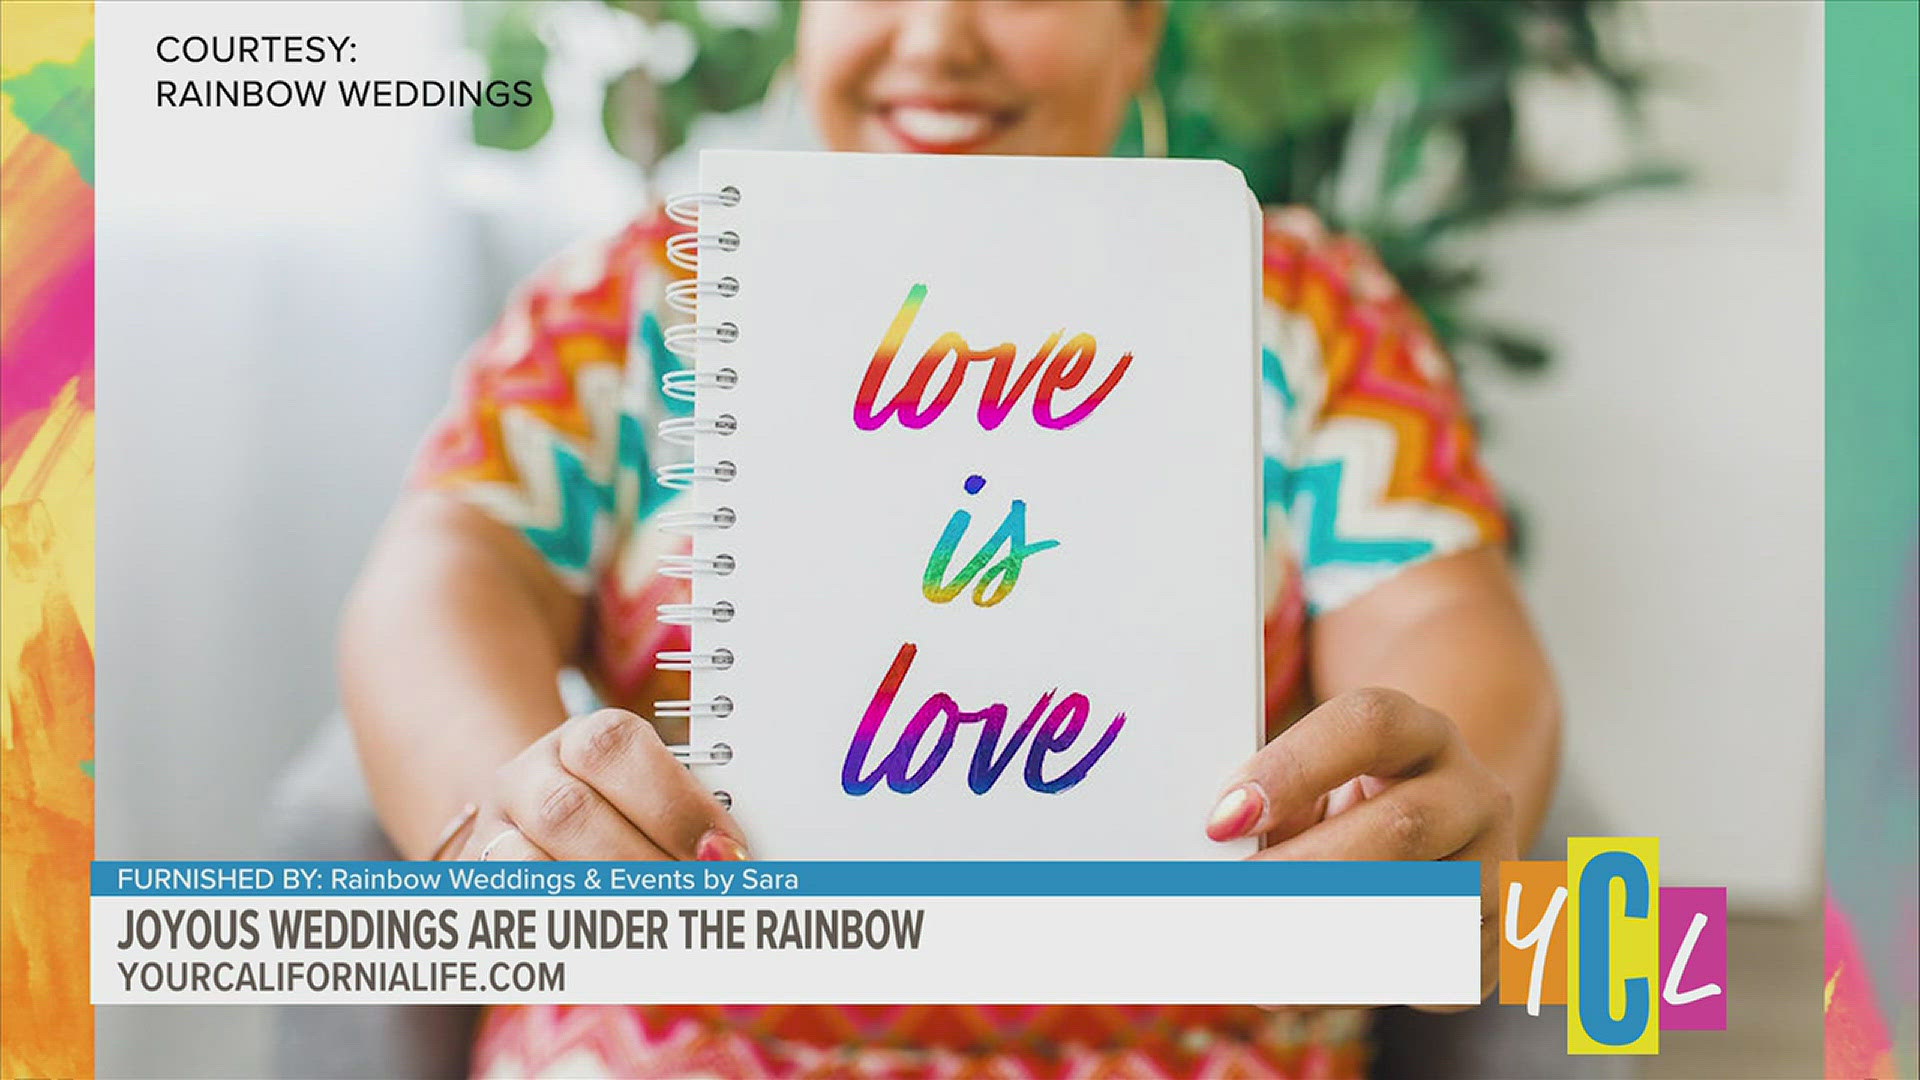 Check out how Rainbow Weddings & Events has a special way of making all weddings feel seen and included. Also, learn why wedding planners are a must for the big day.